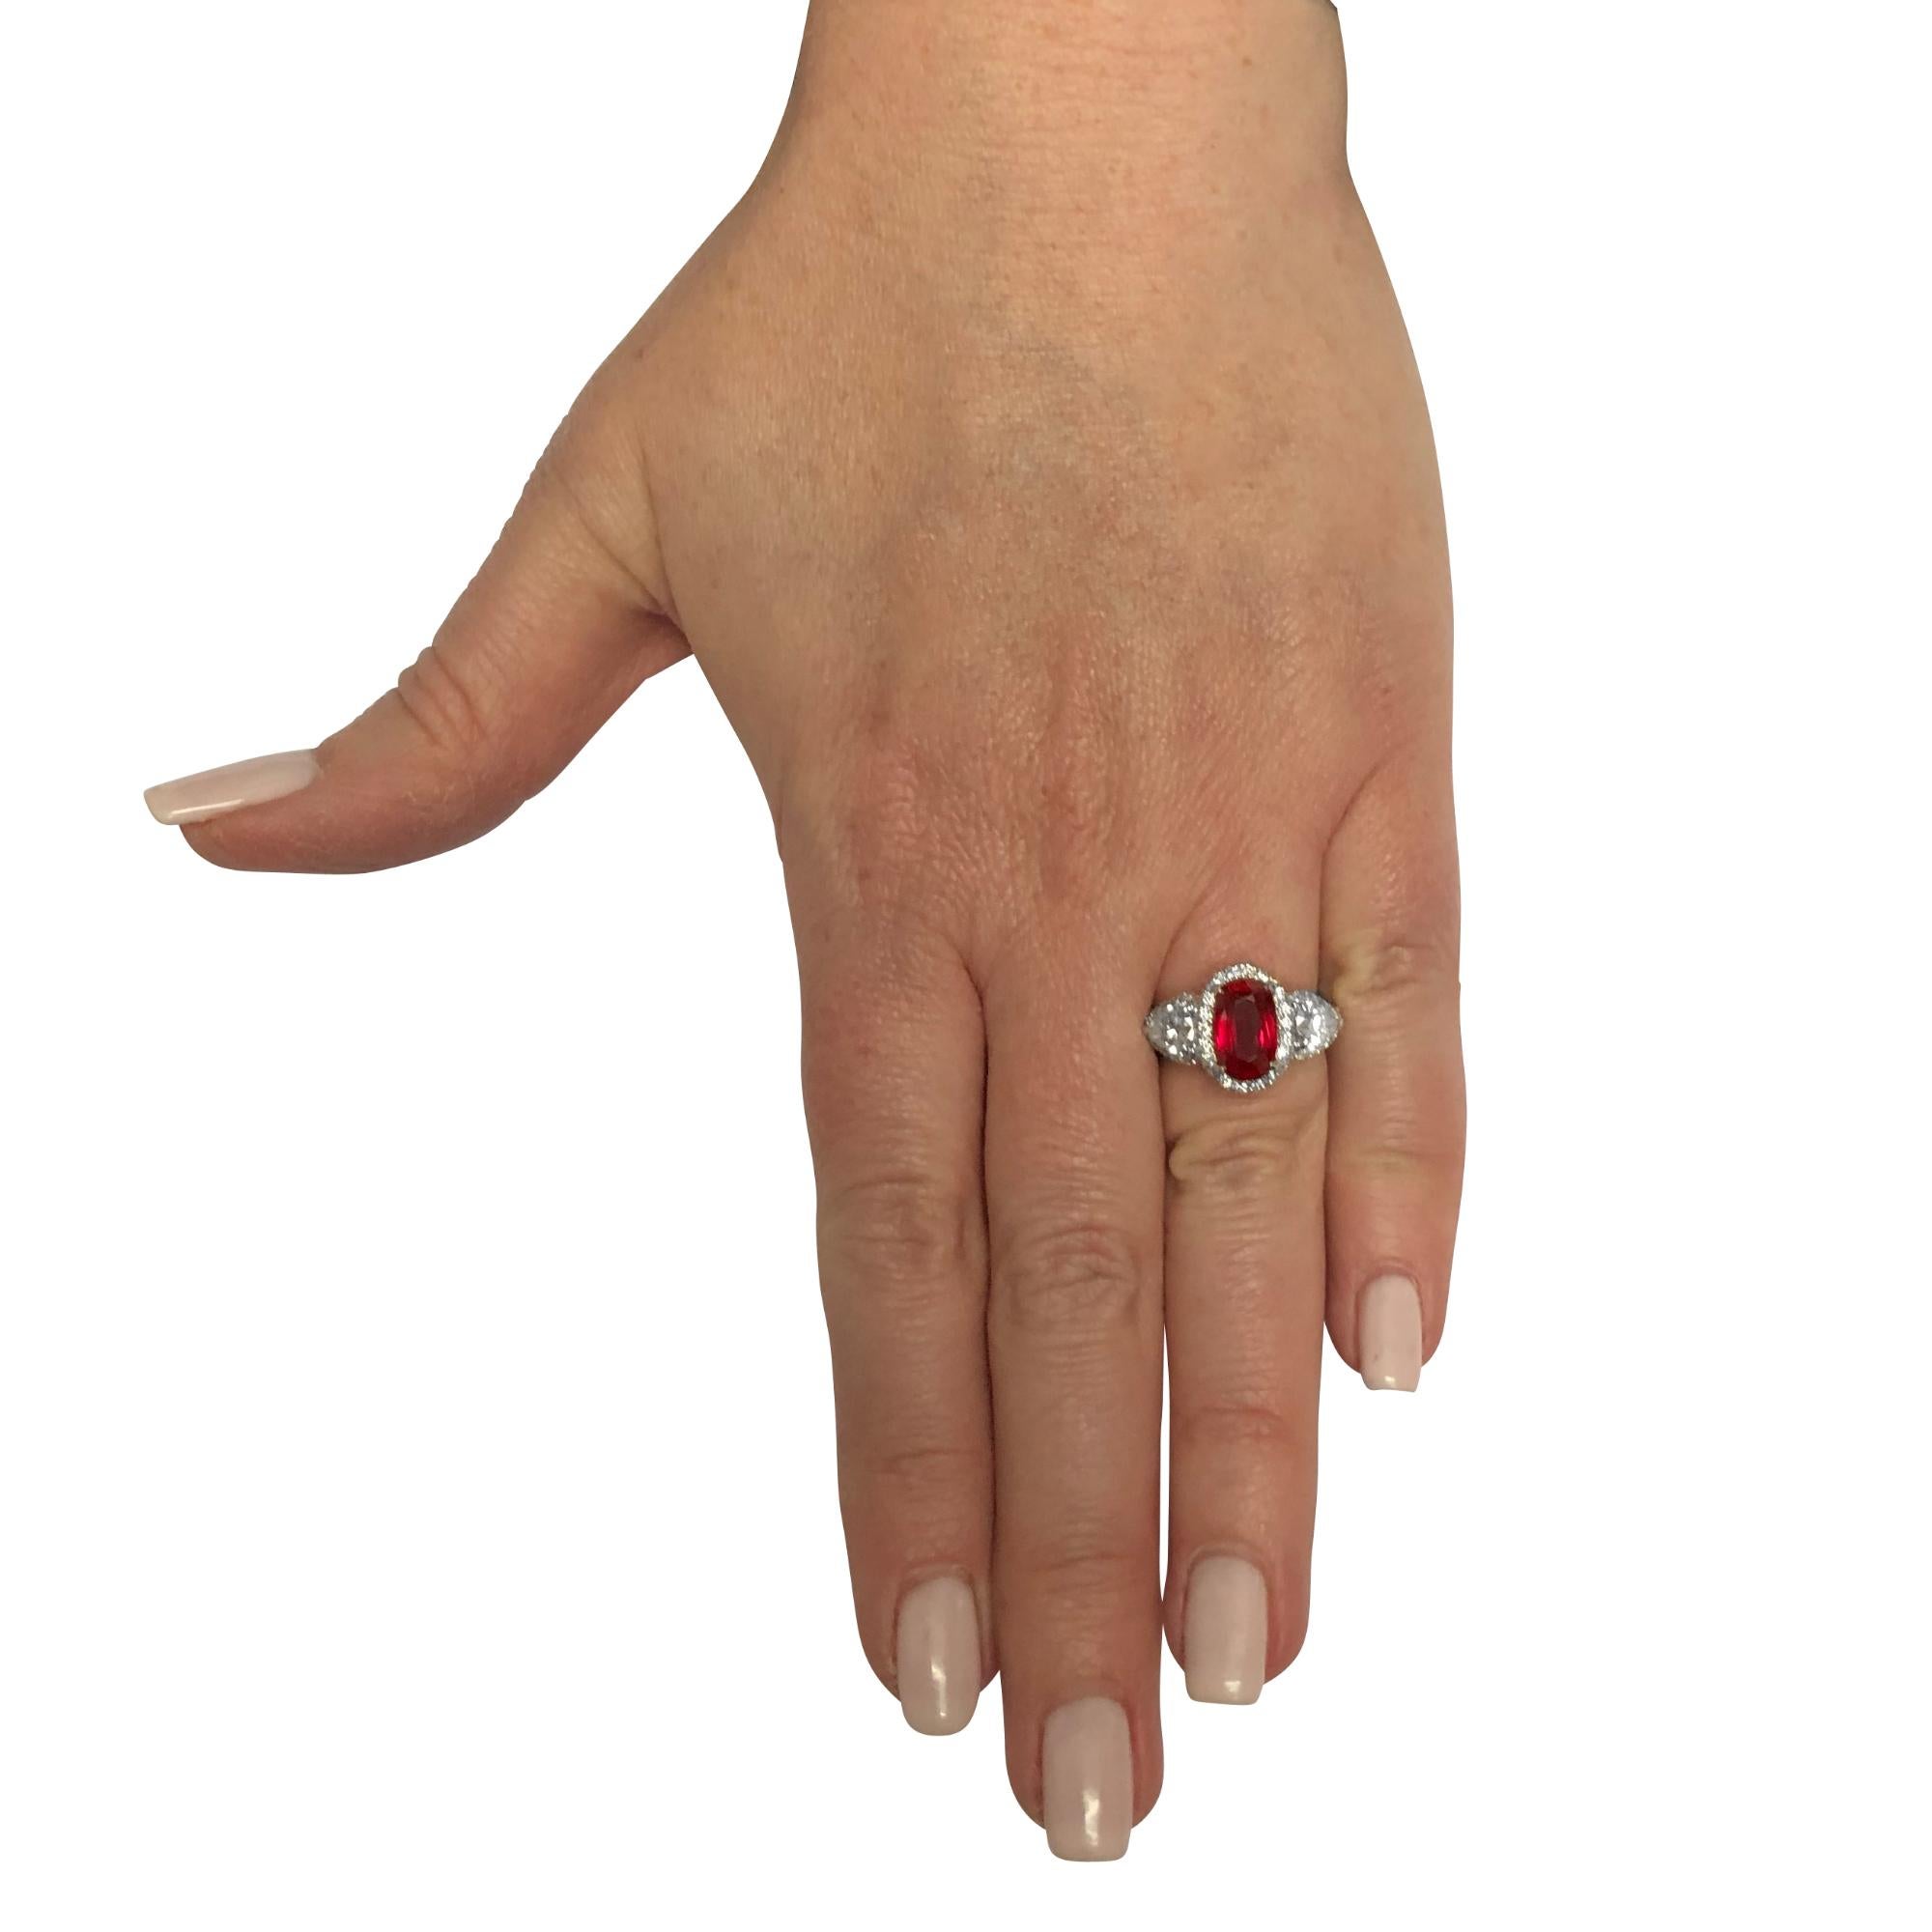 Gorgeous ring crafted in platinum, showcasing a stunning AGL certified cushion cut unheated Burma ruby, weighing 2.42 carats, and two pear shape diamonds weighing 1 carat total, H color SI clarity framed with 50 round brilliant cut diamonds weighing